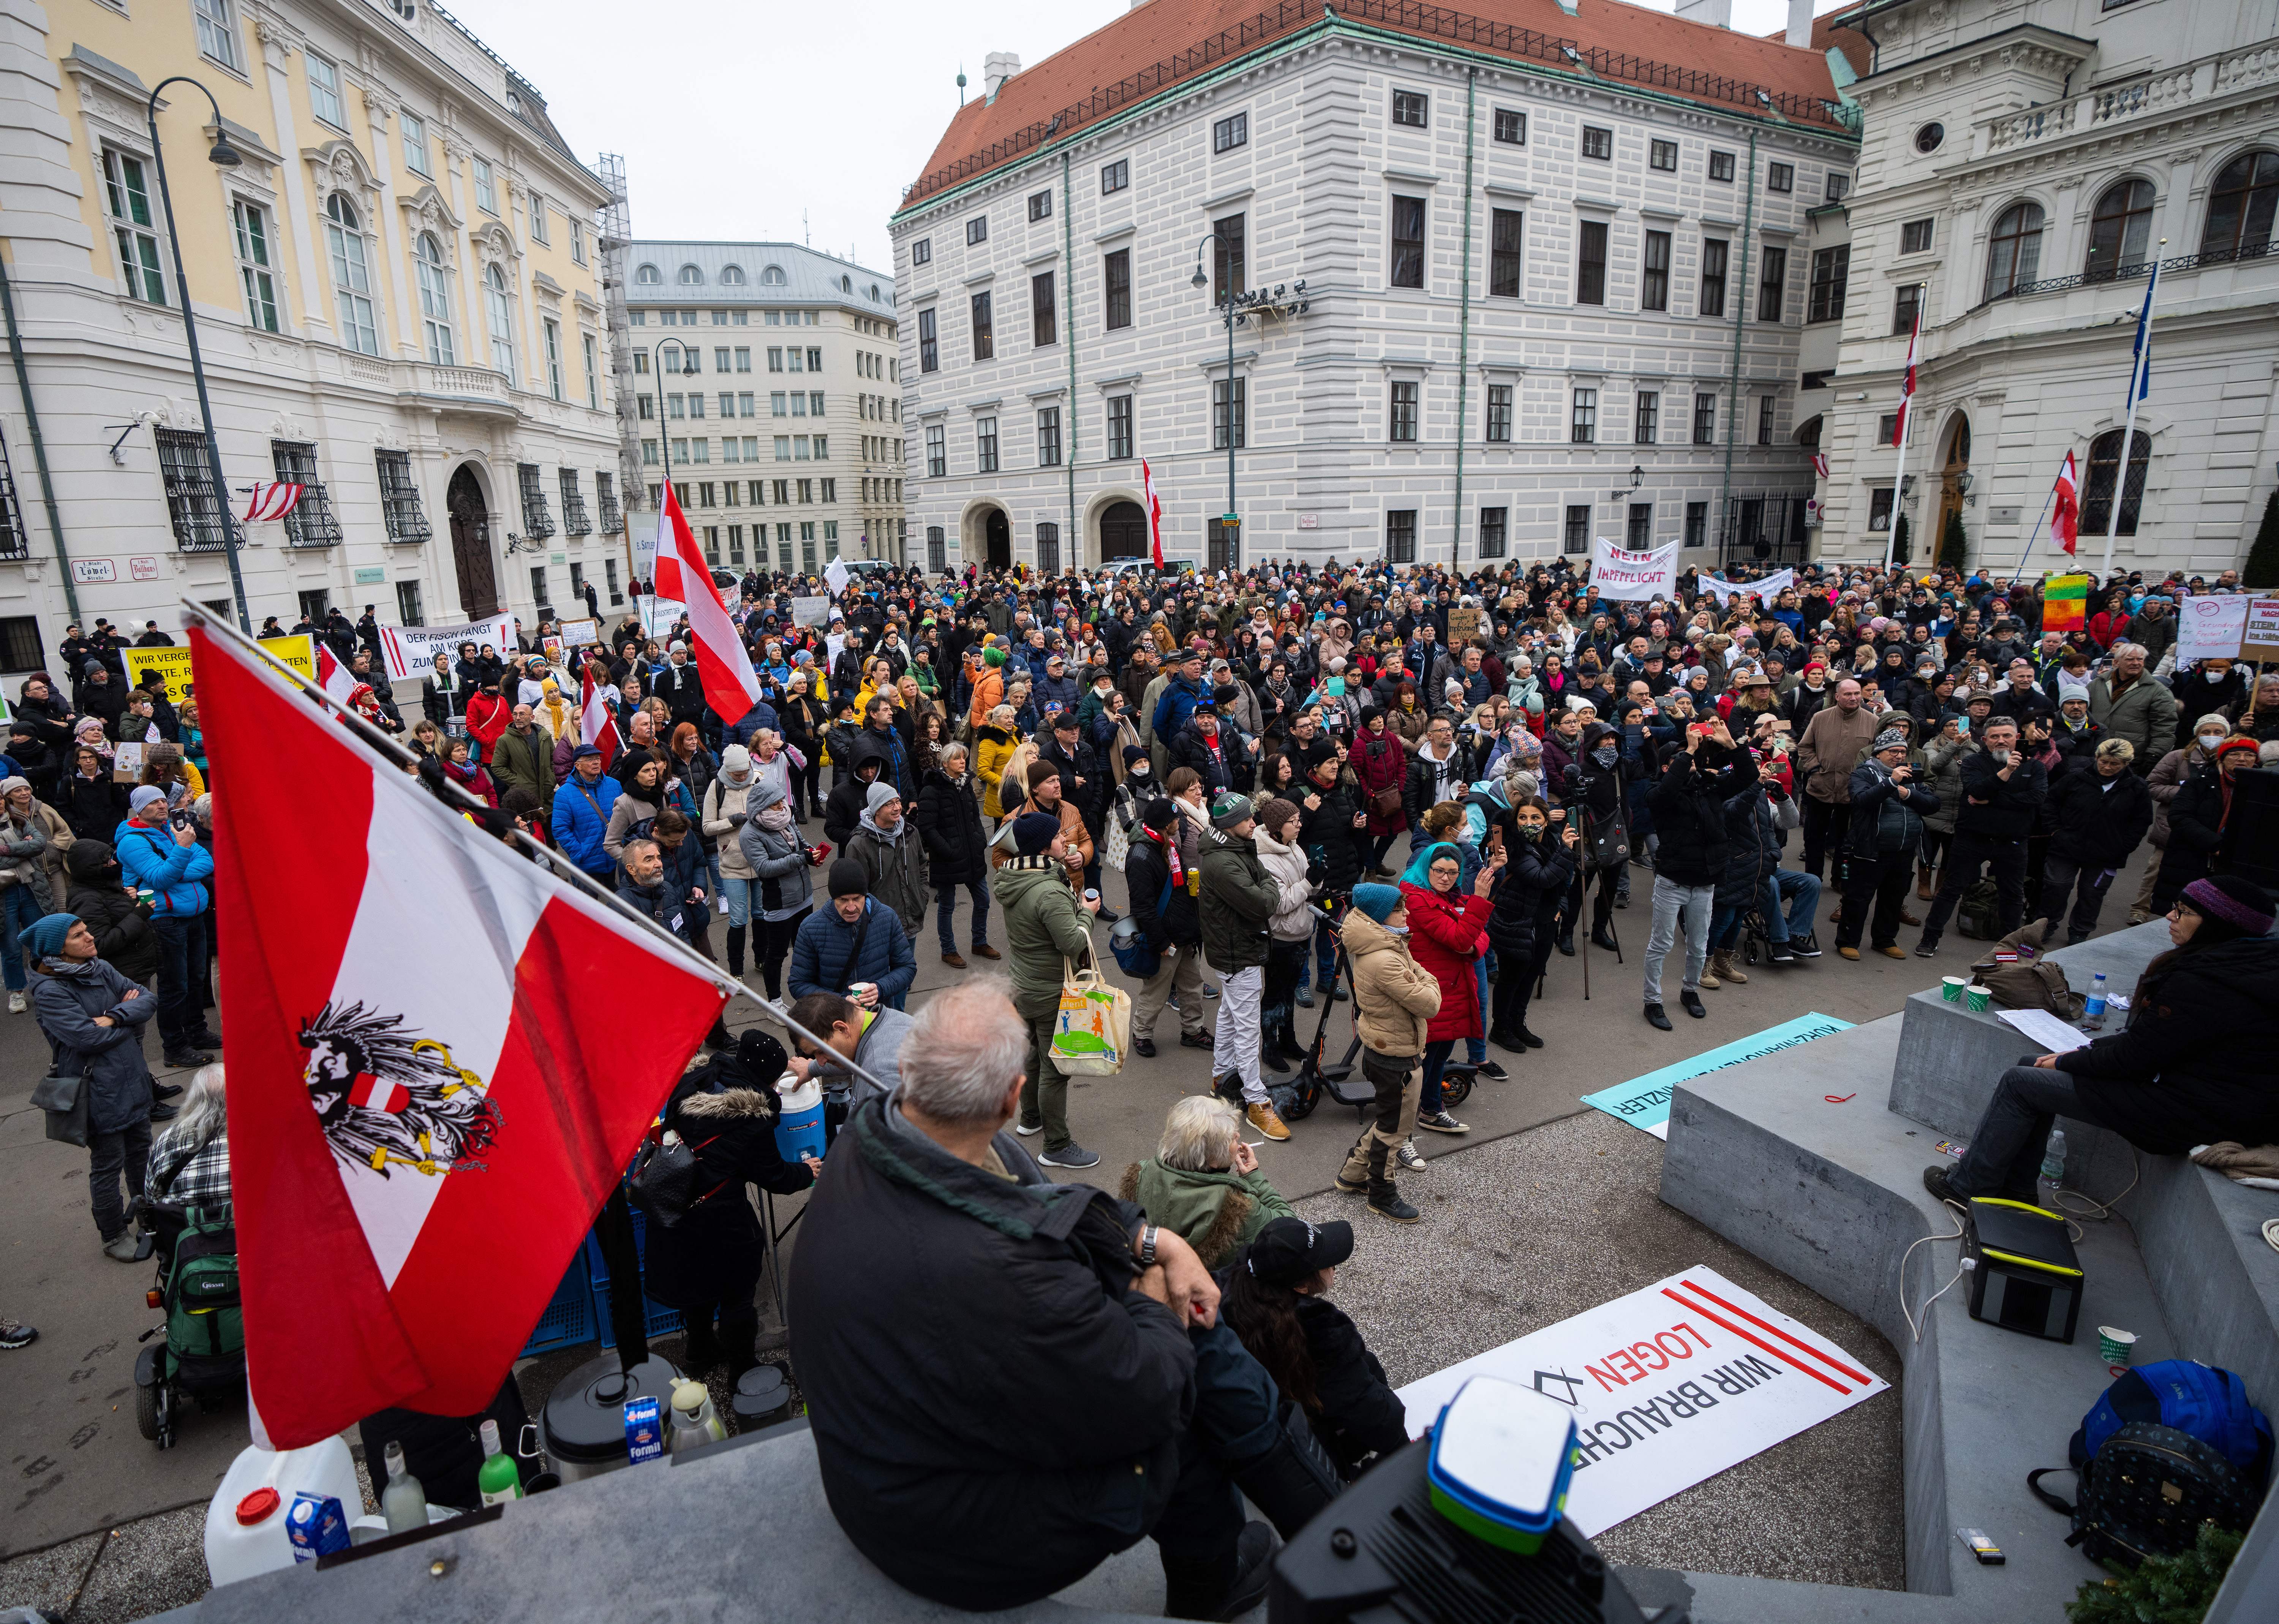 Anti-vaccination activists in Vienna, Austria protest against the nationwide lockdown